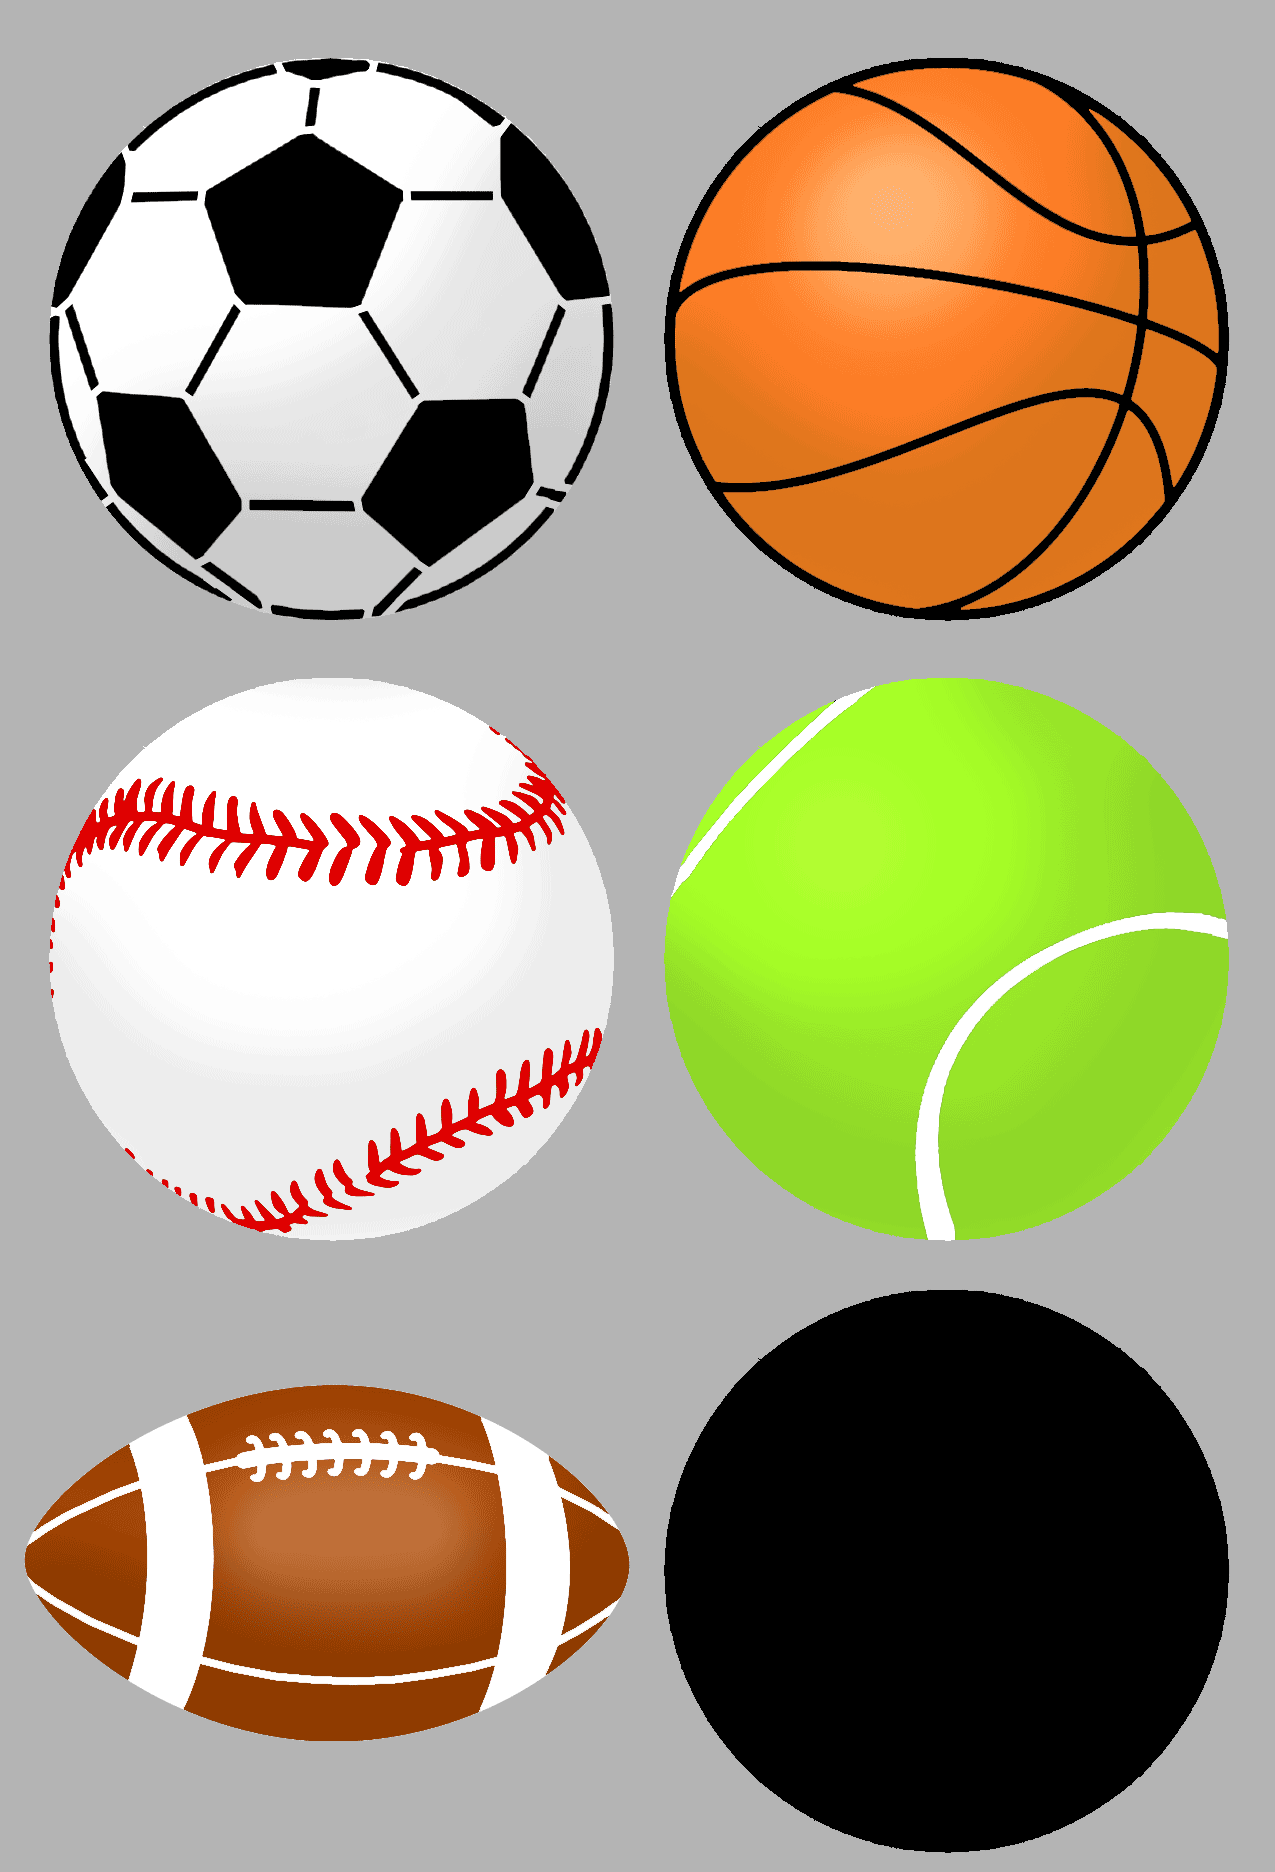 AppleRound Pack of 4 Sports Balls with 1 Pump: 1 Each of 5 Soccer Ball, 5  Basketball, 5 Playgroun…See more AppleRound Pack of 4 Sports Balls with 1